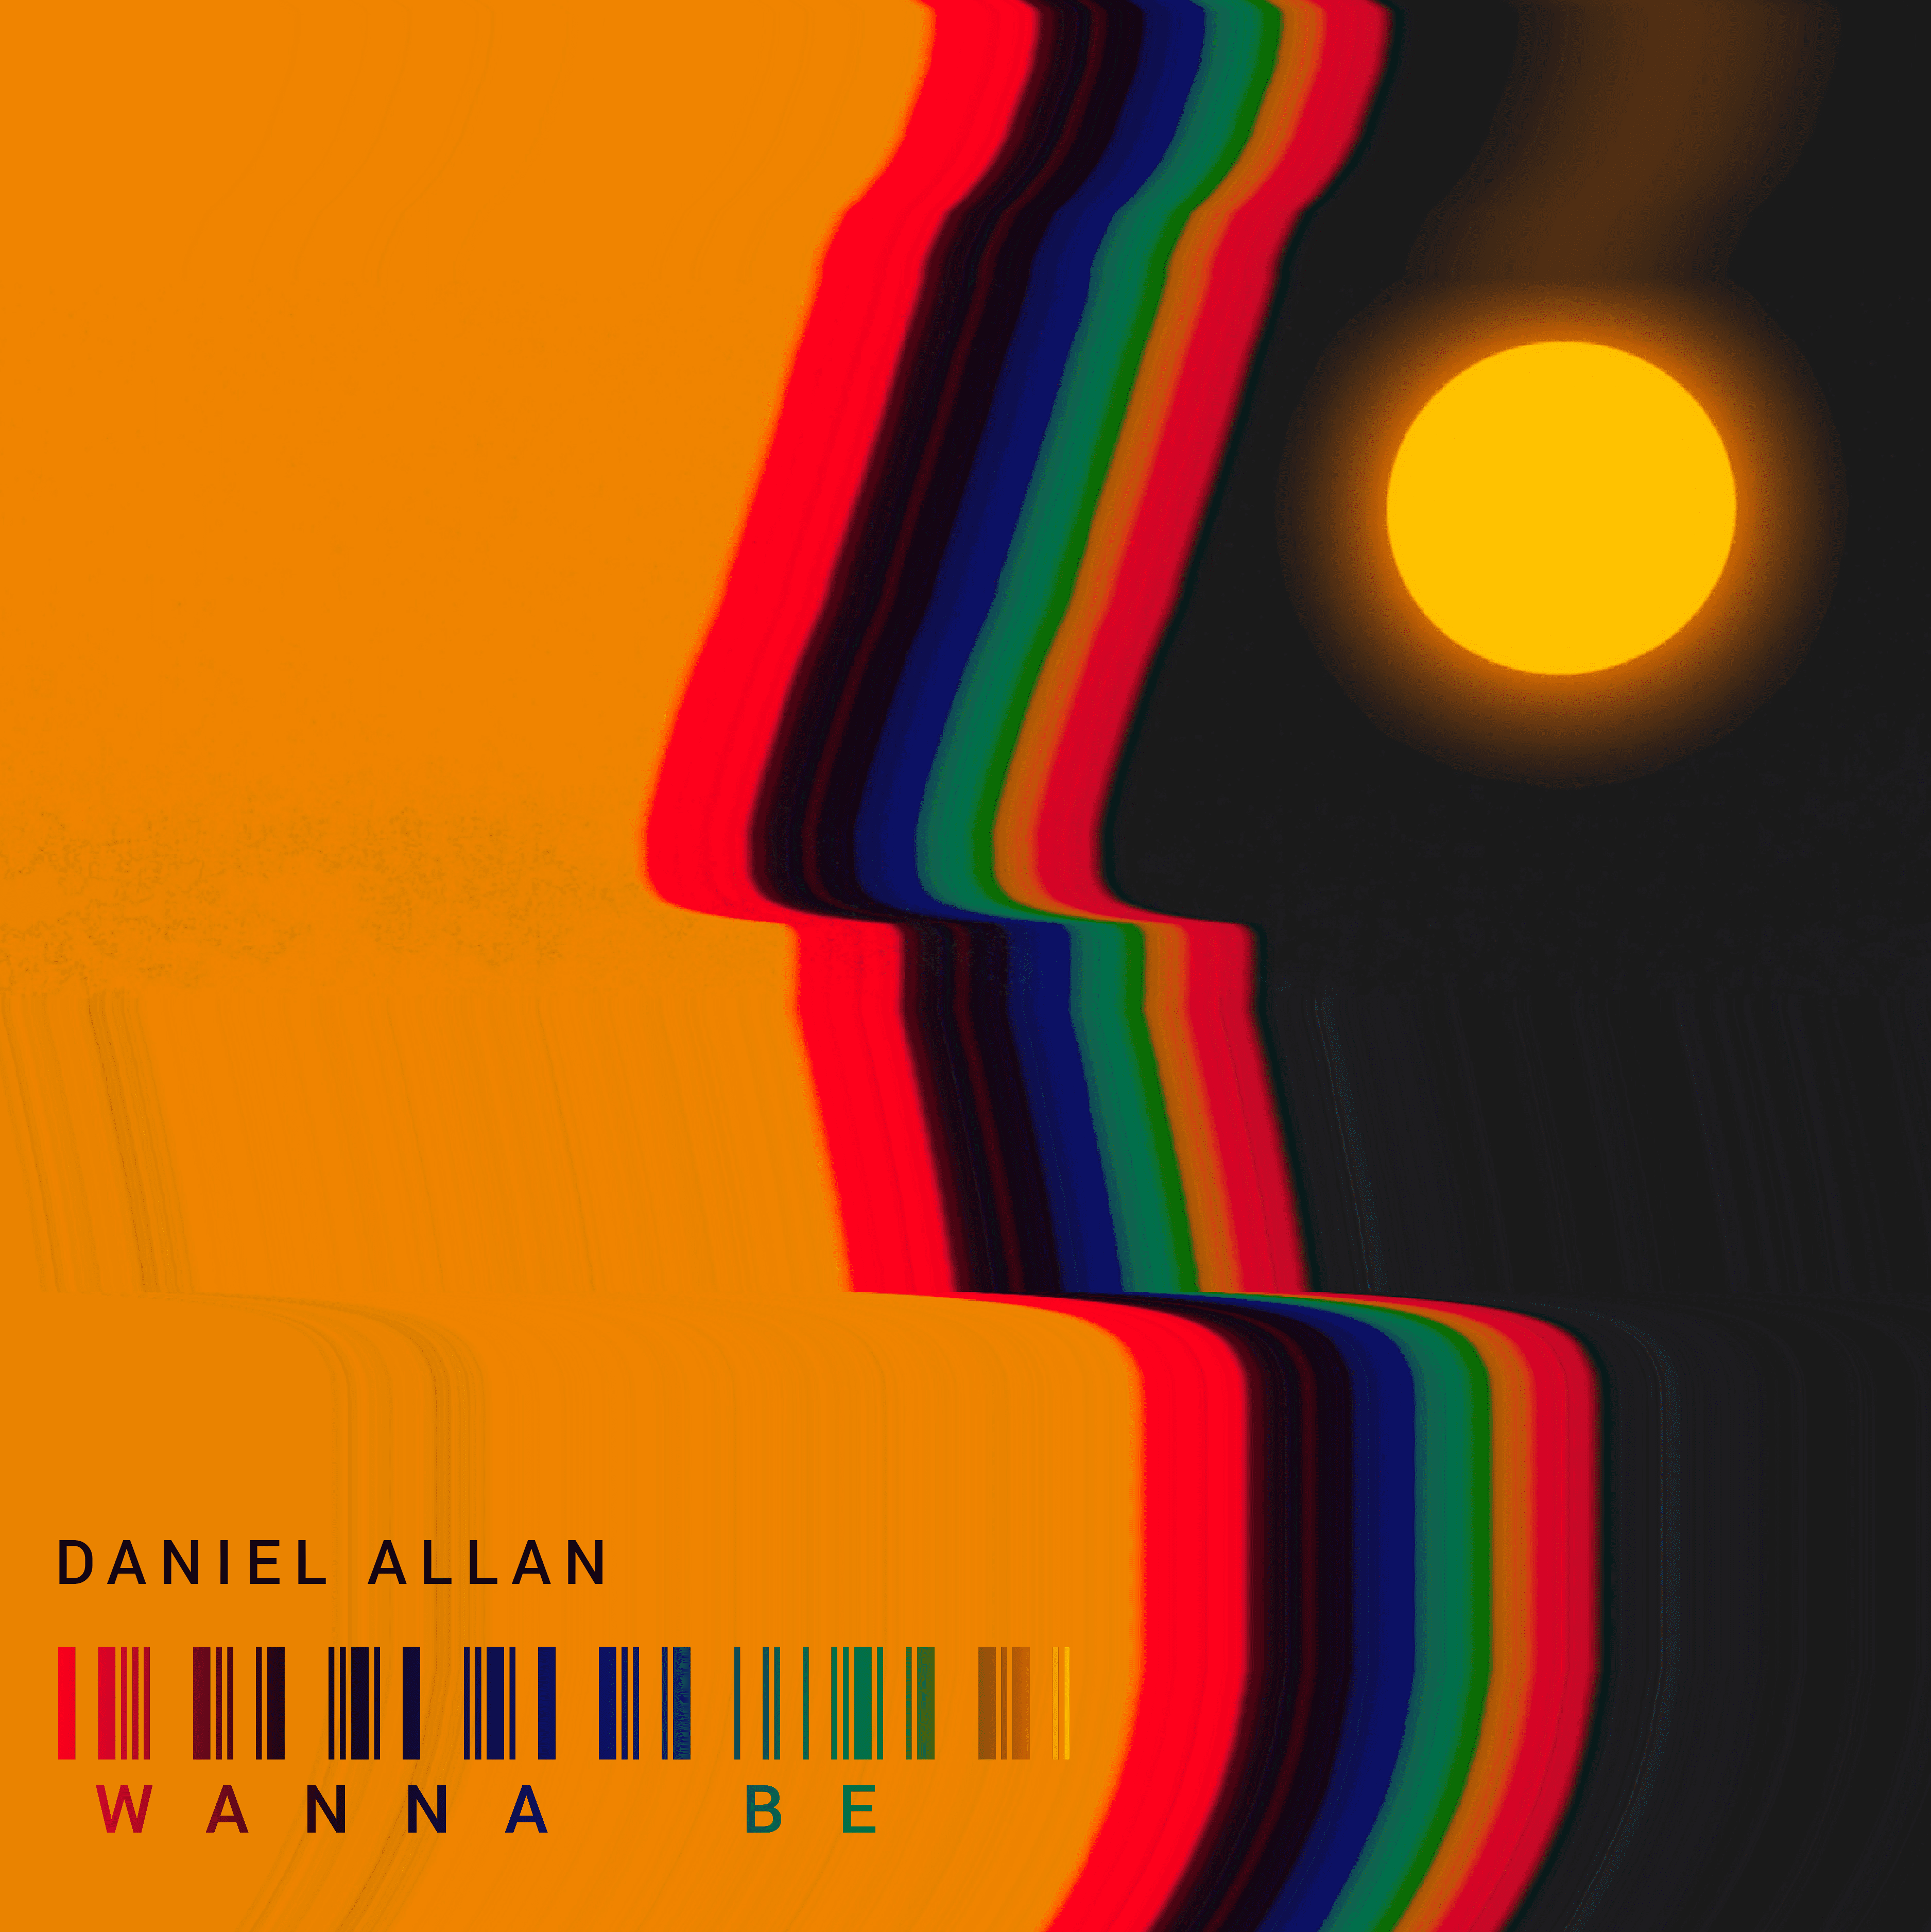 Cover art for Daniel Allan's song: Wanna Be (The Vault)